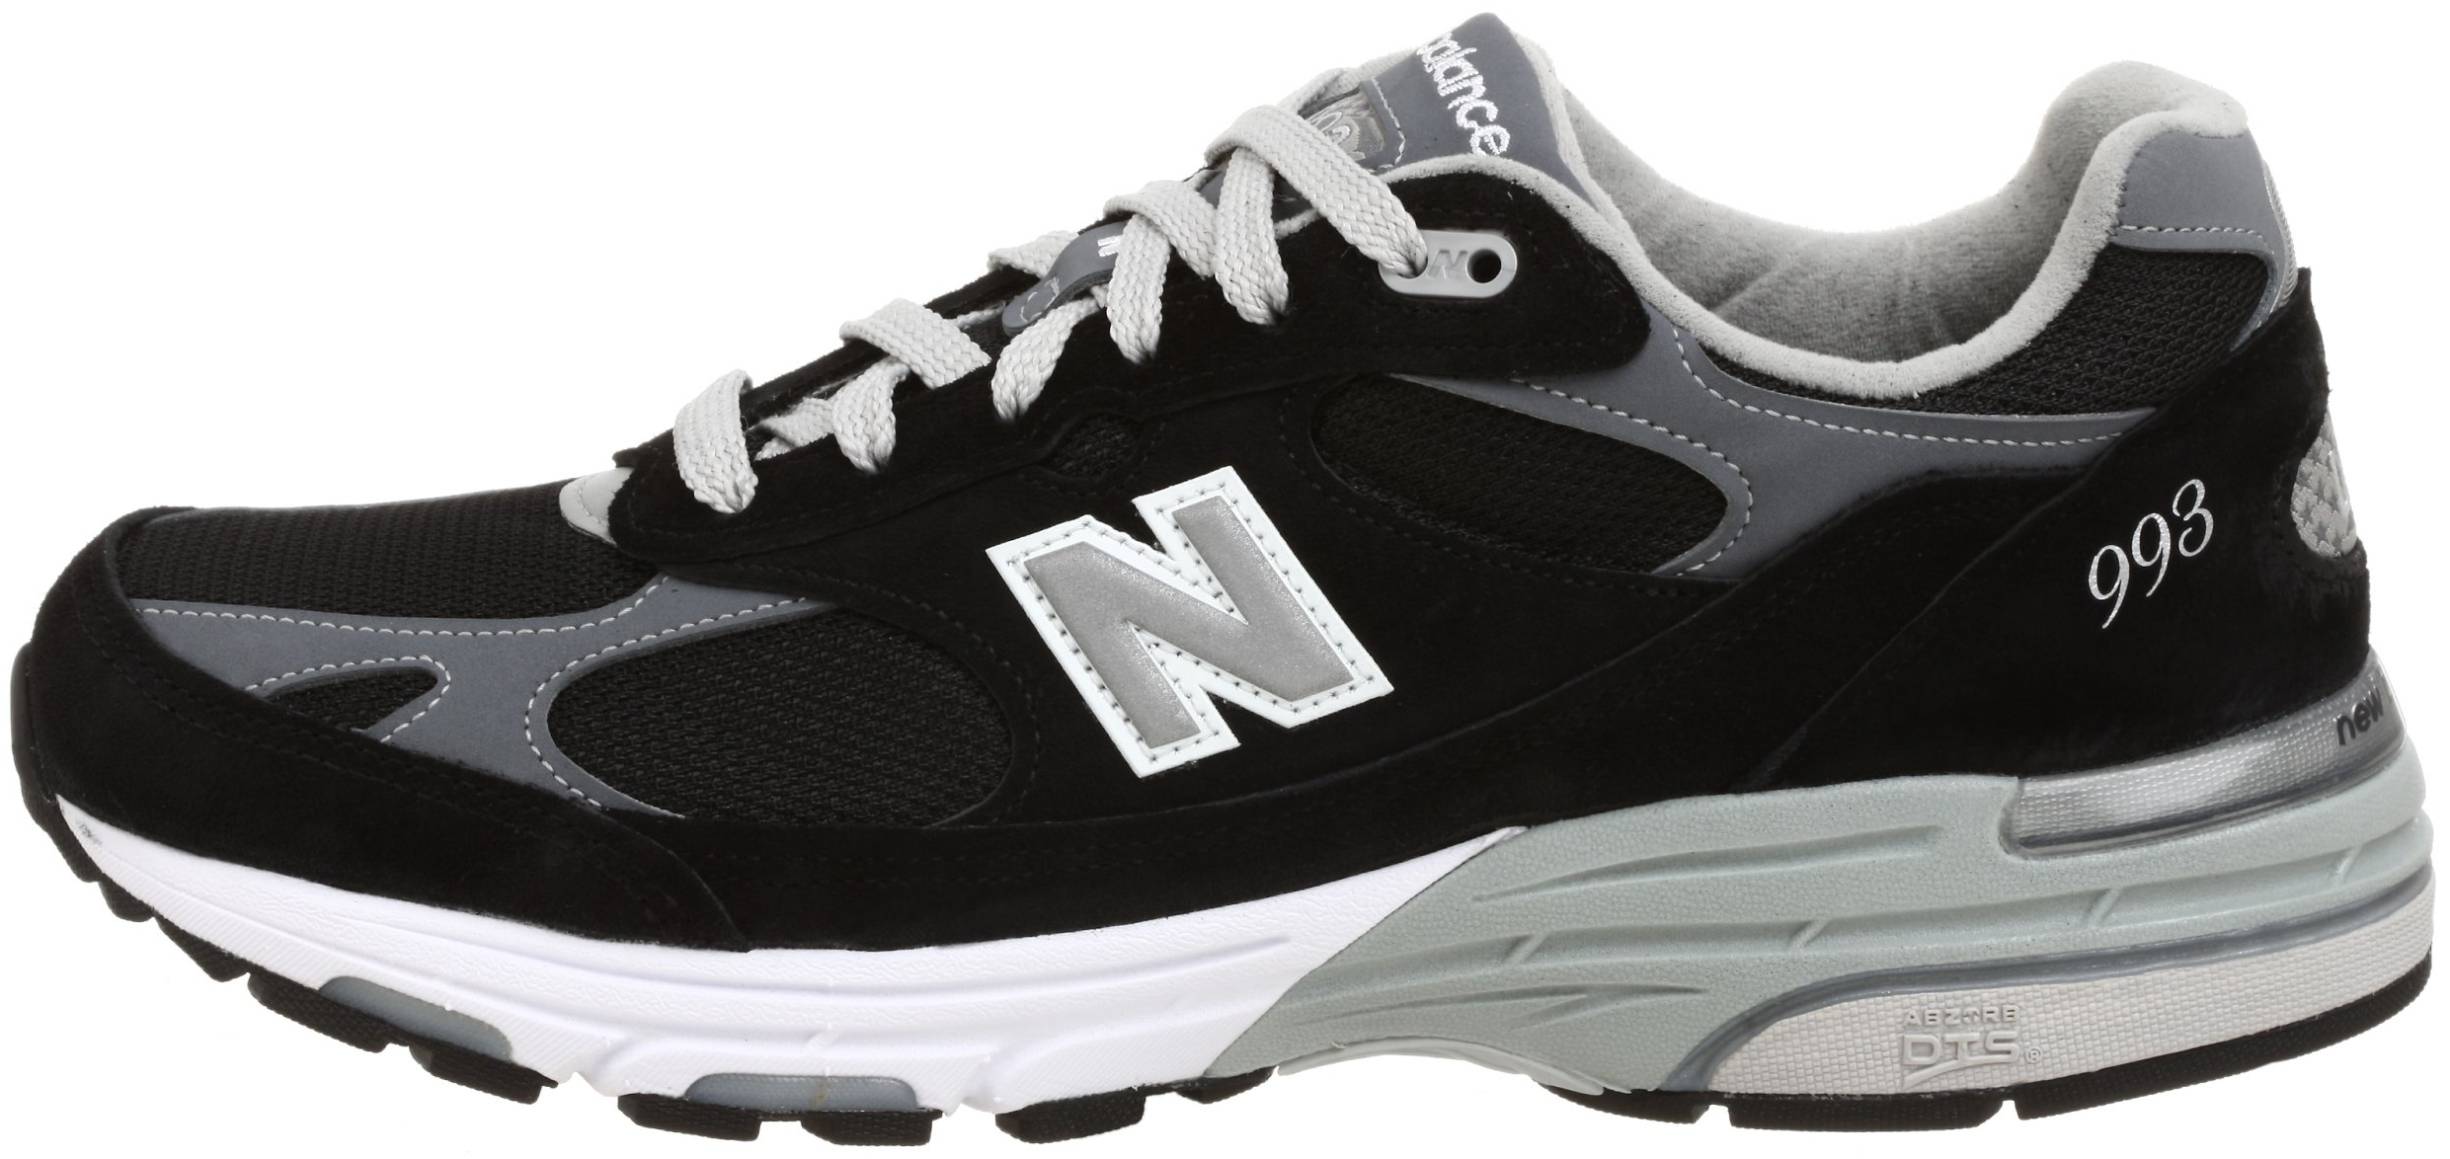 New Balance Men's 993 Hot Sale, UP TO 51% OFF